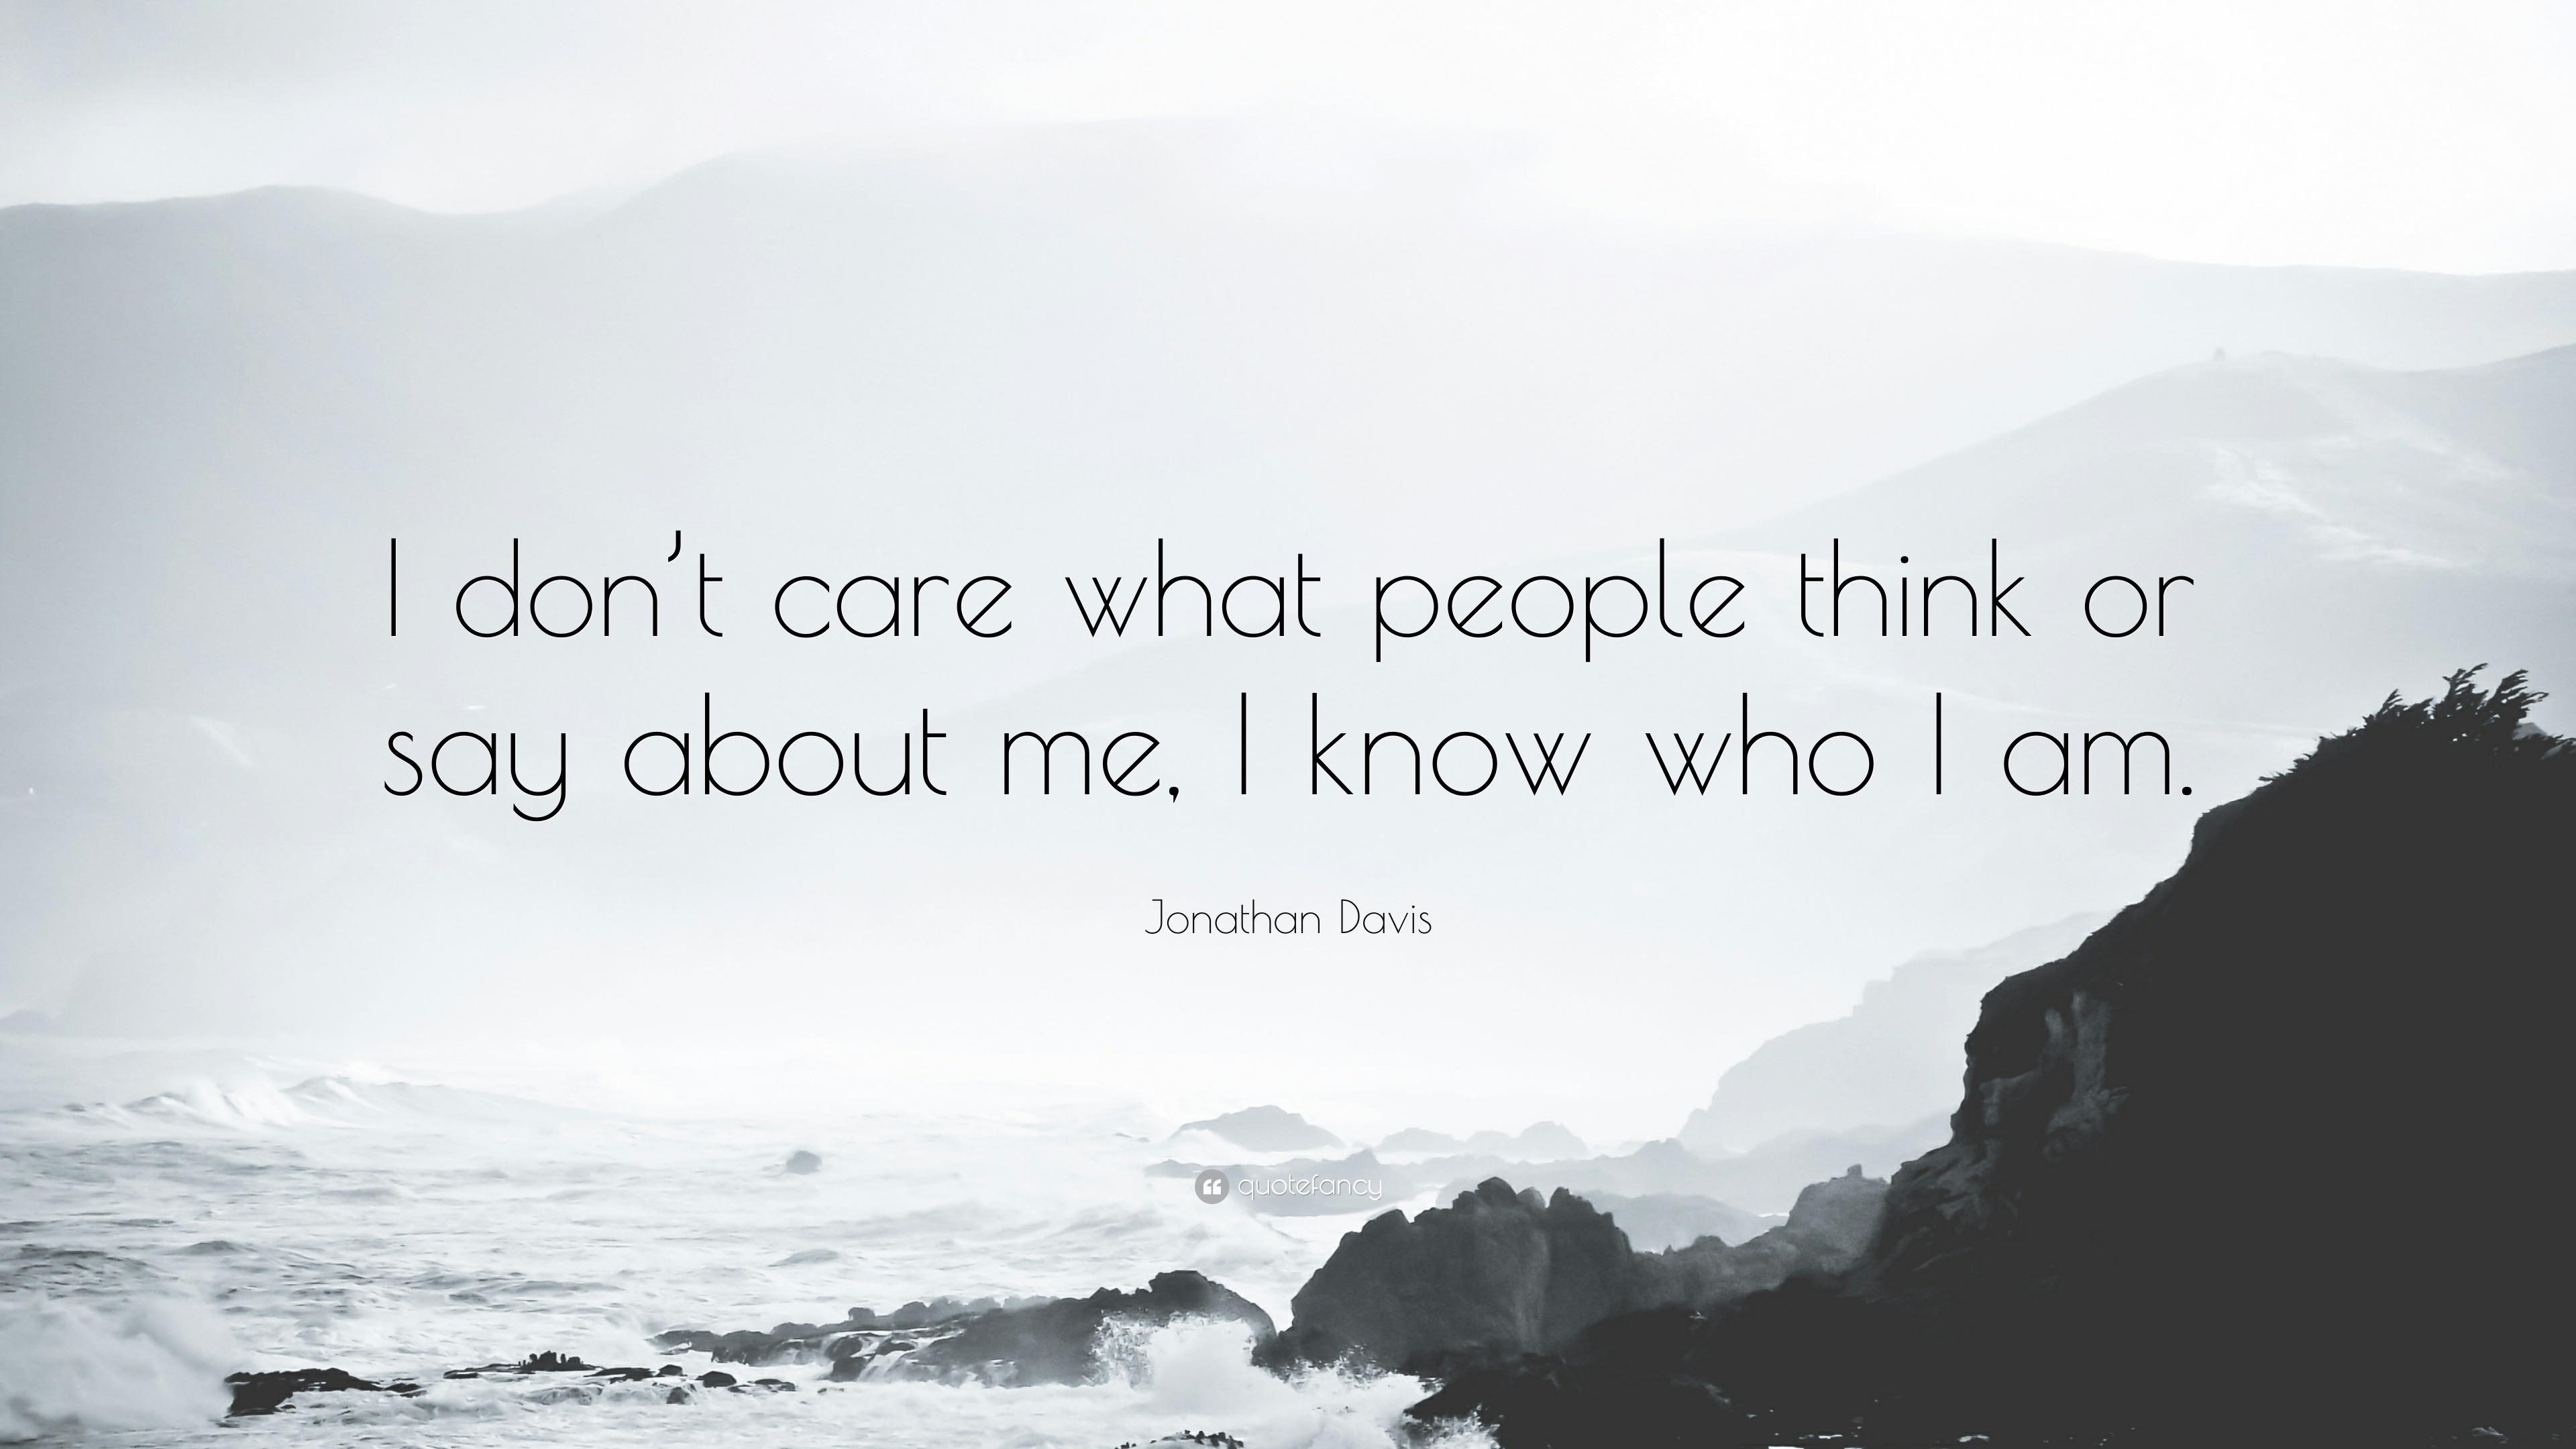 Jonathan Davis Quote: “I don’t care what people think or say about me